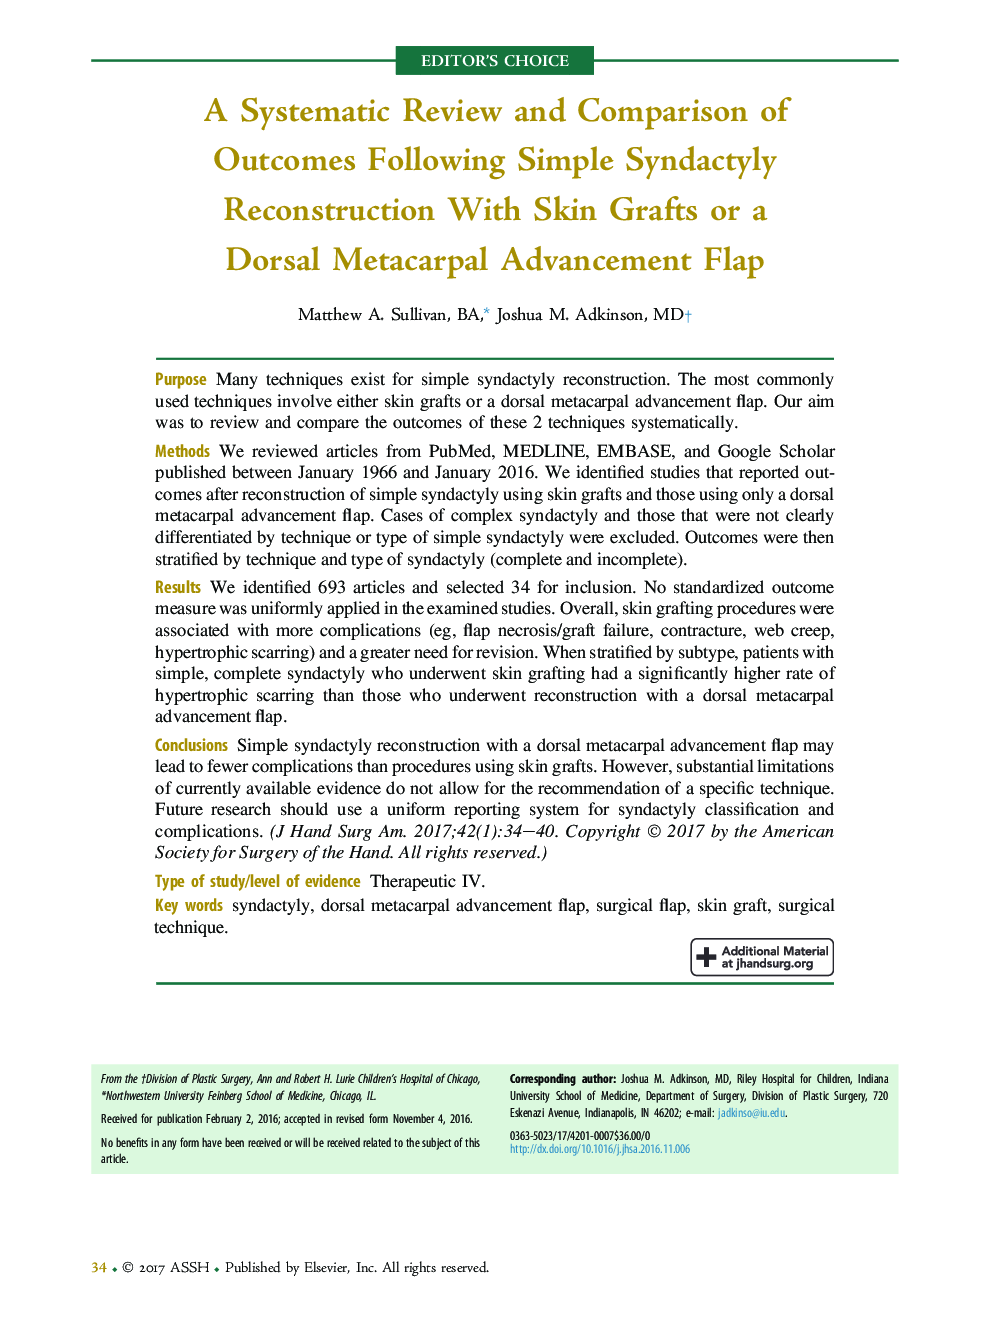 A Systematic Review and Comparison of Outcomes Following Simple Syndactyly Reconstruction With Skin Grafts or a Dorsal Metacarpal Advancement Flap